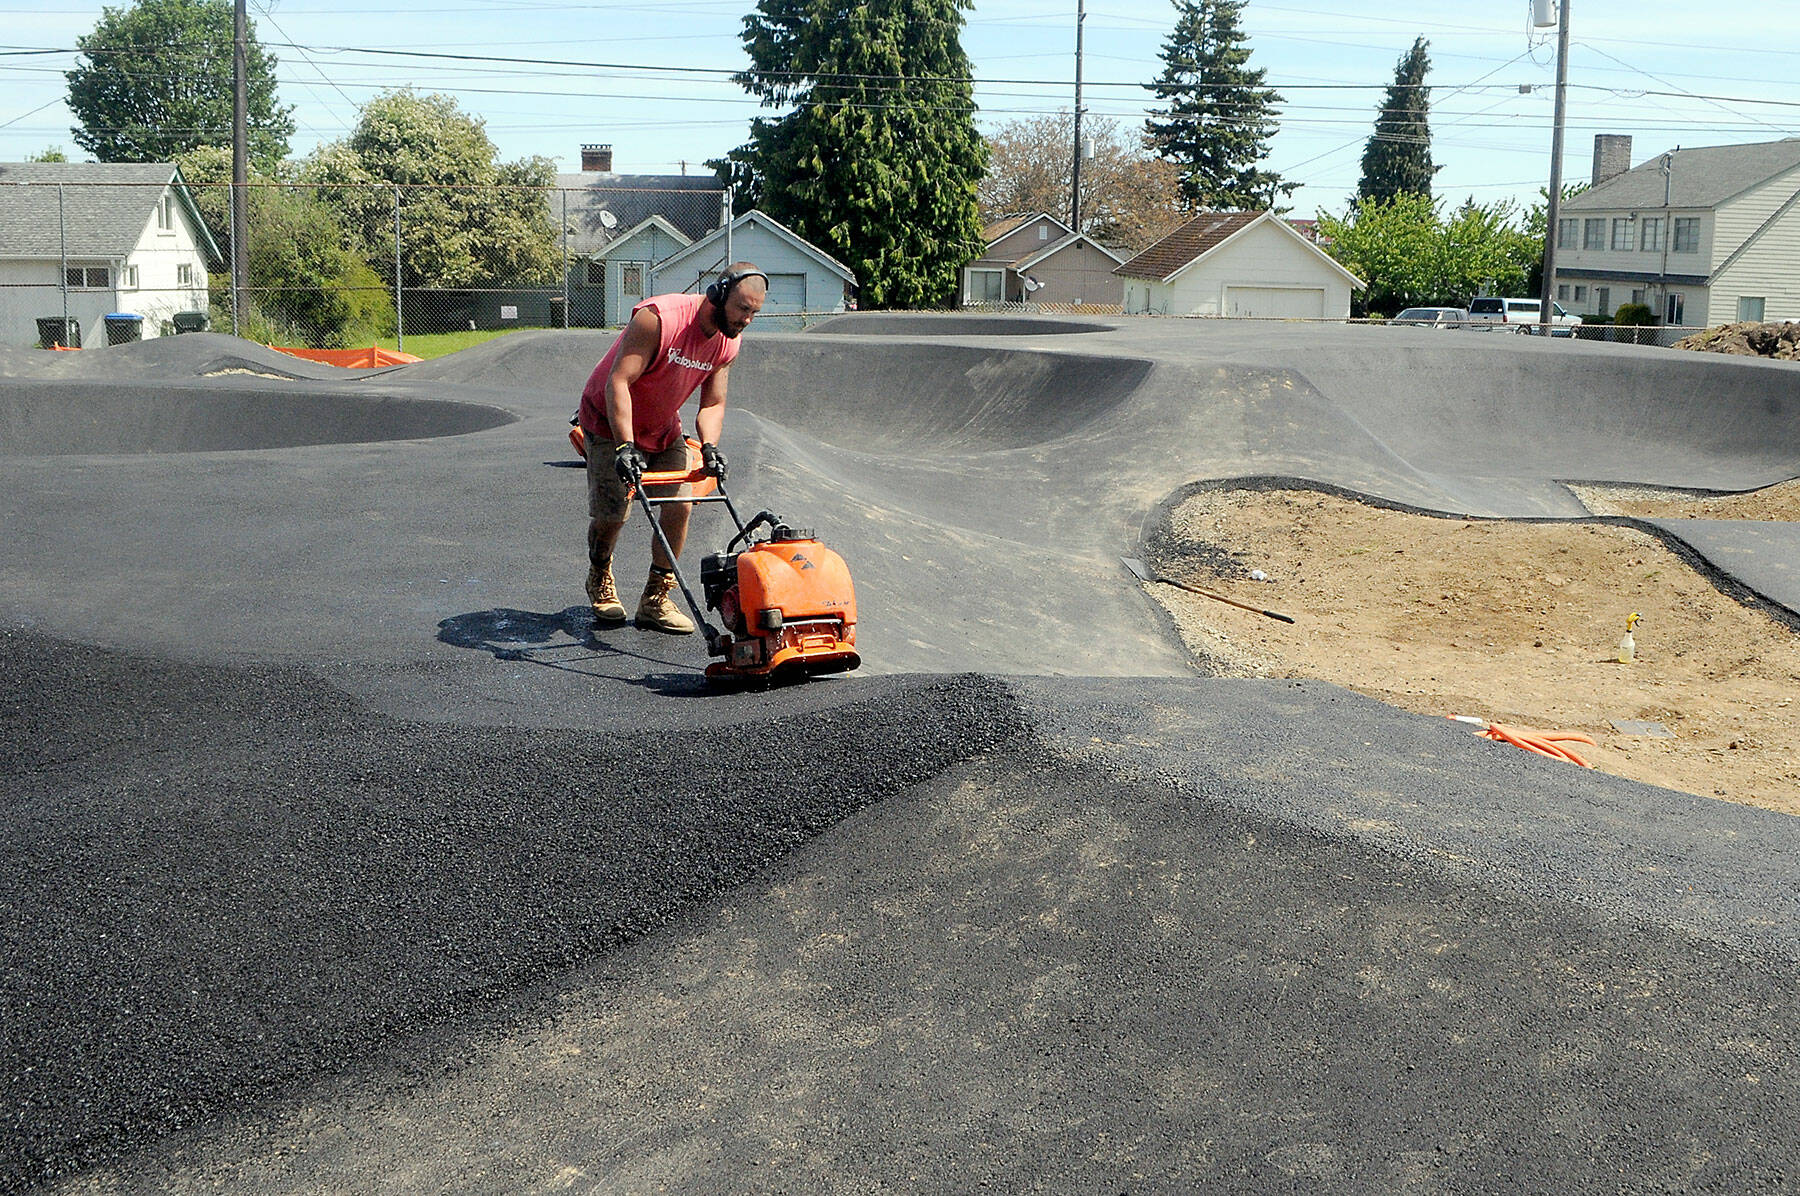 T.J. Farris of Bakersfield, Calif., an employee of the Flims, Switzerland-based Velosolutions, uses a compactor on Tuesday to create a lane surface on an asphalt portion of a pump track being built at Erickson Playfield in Port Angeles. (Keith Thorpe/Peninsula Daily News)